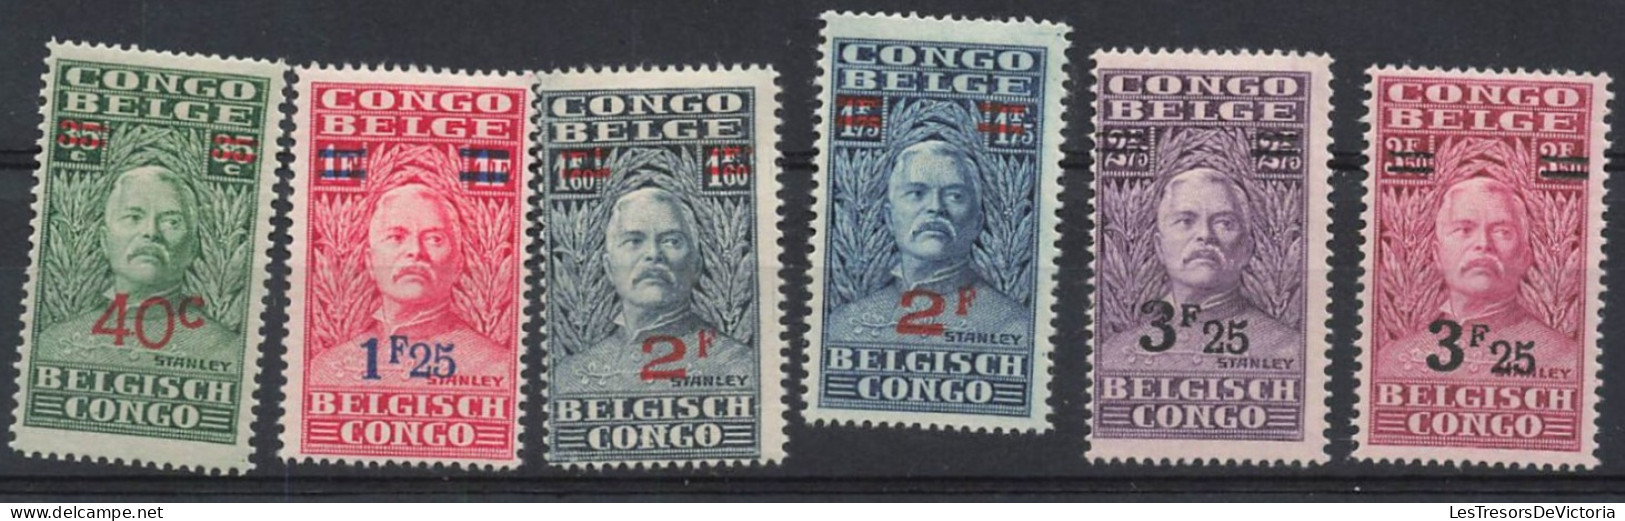 Congo Belge - 1931 - COB 162/67* - Timbres " Starley" Avec Surcharges - Cote 18 - Unused Stamps